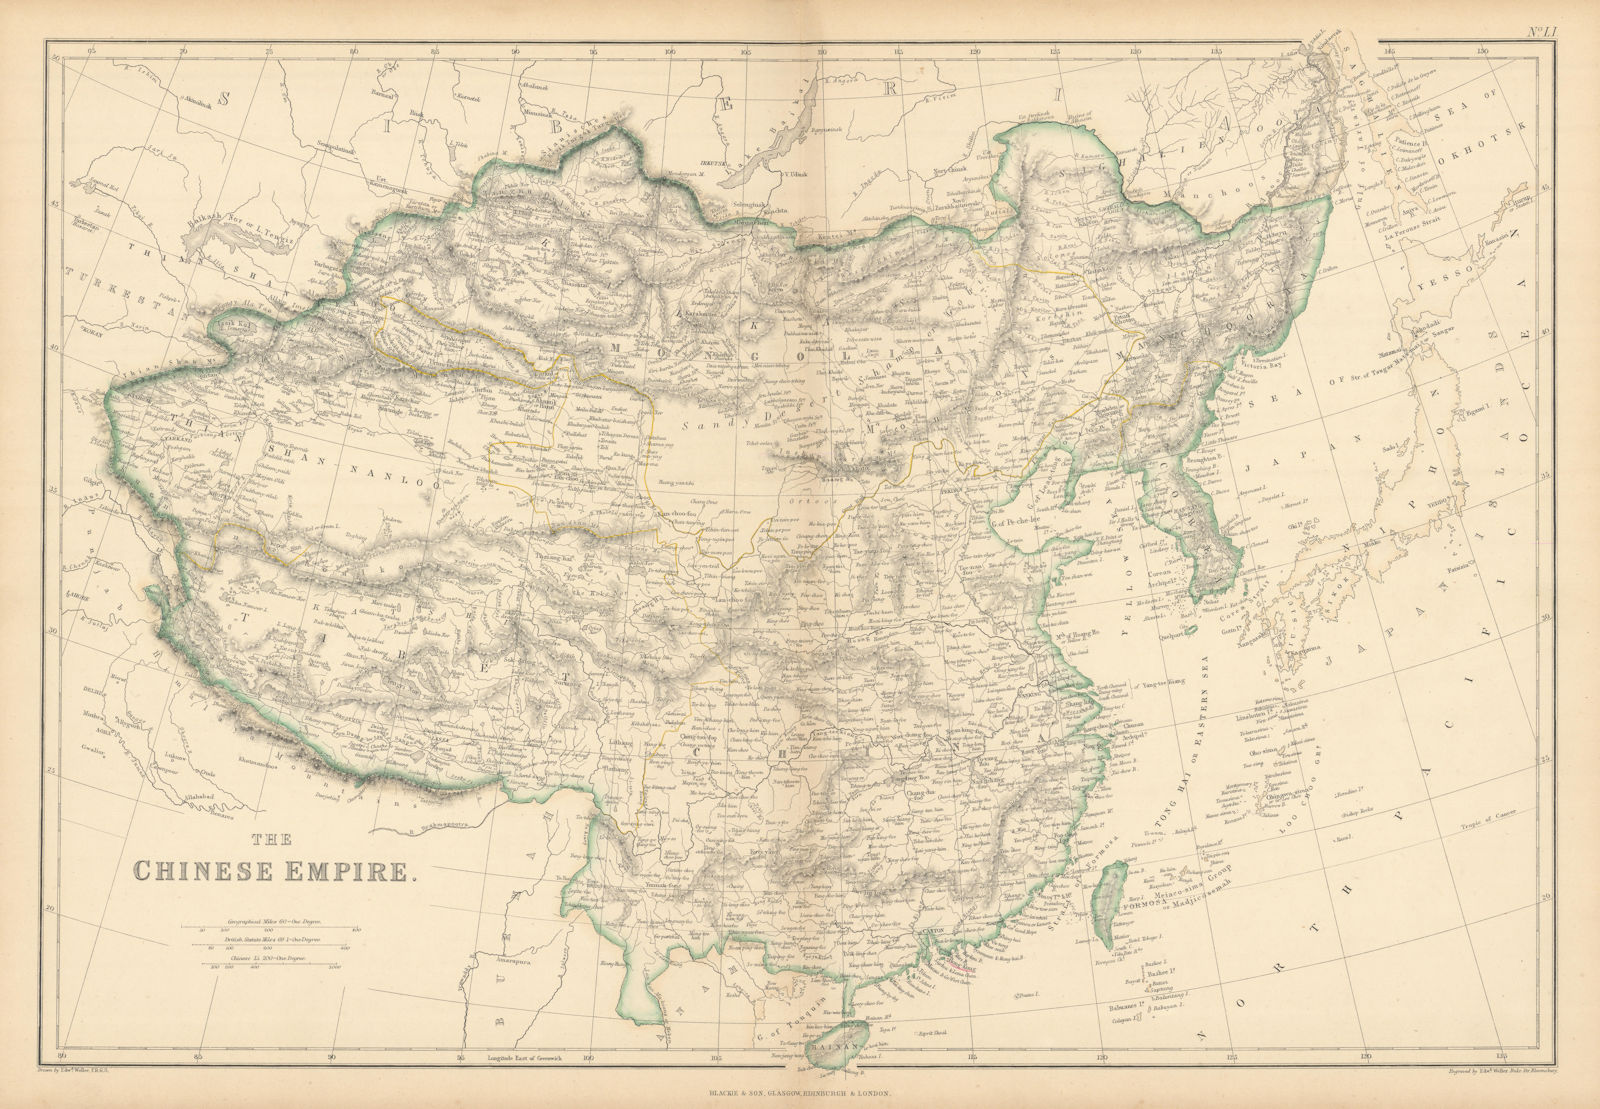 The Chinese Empire by Edward Weller. China, Mongolia, Tibet & Korea 1859 map